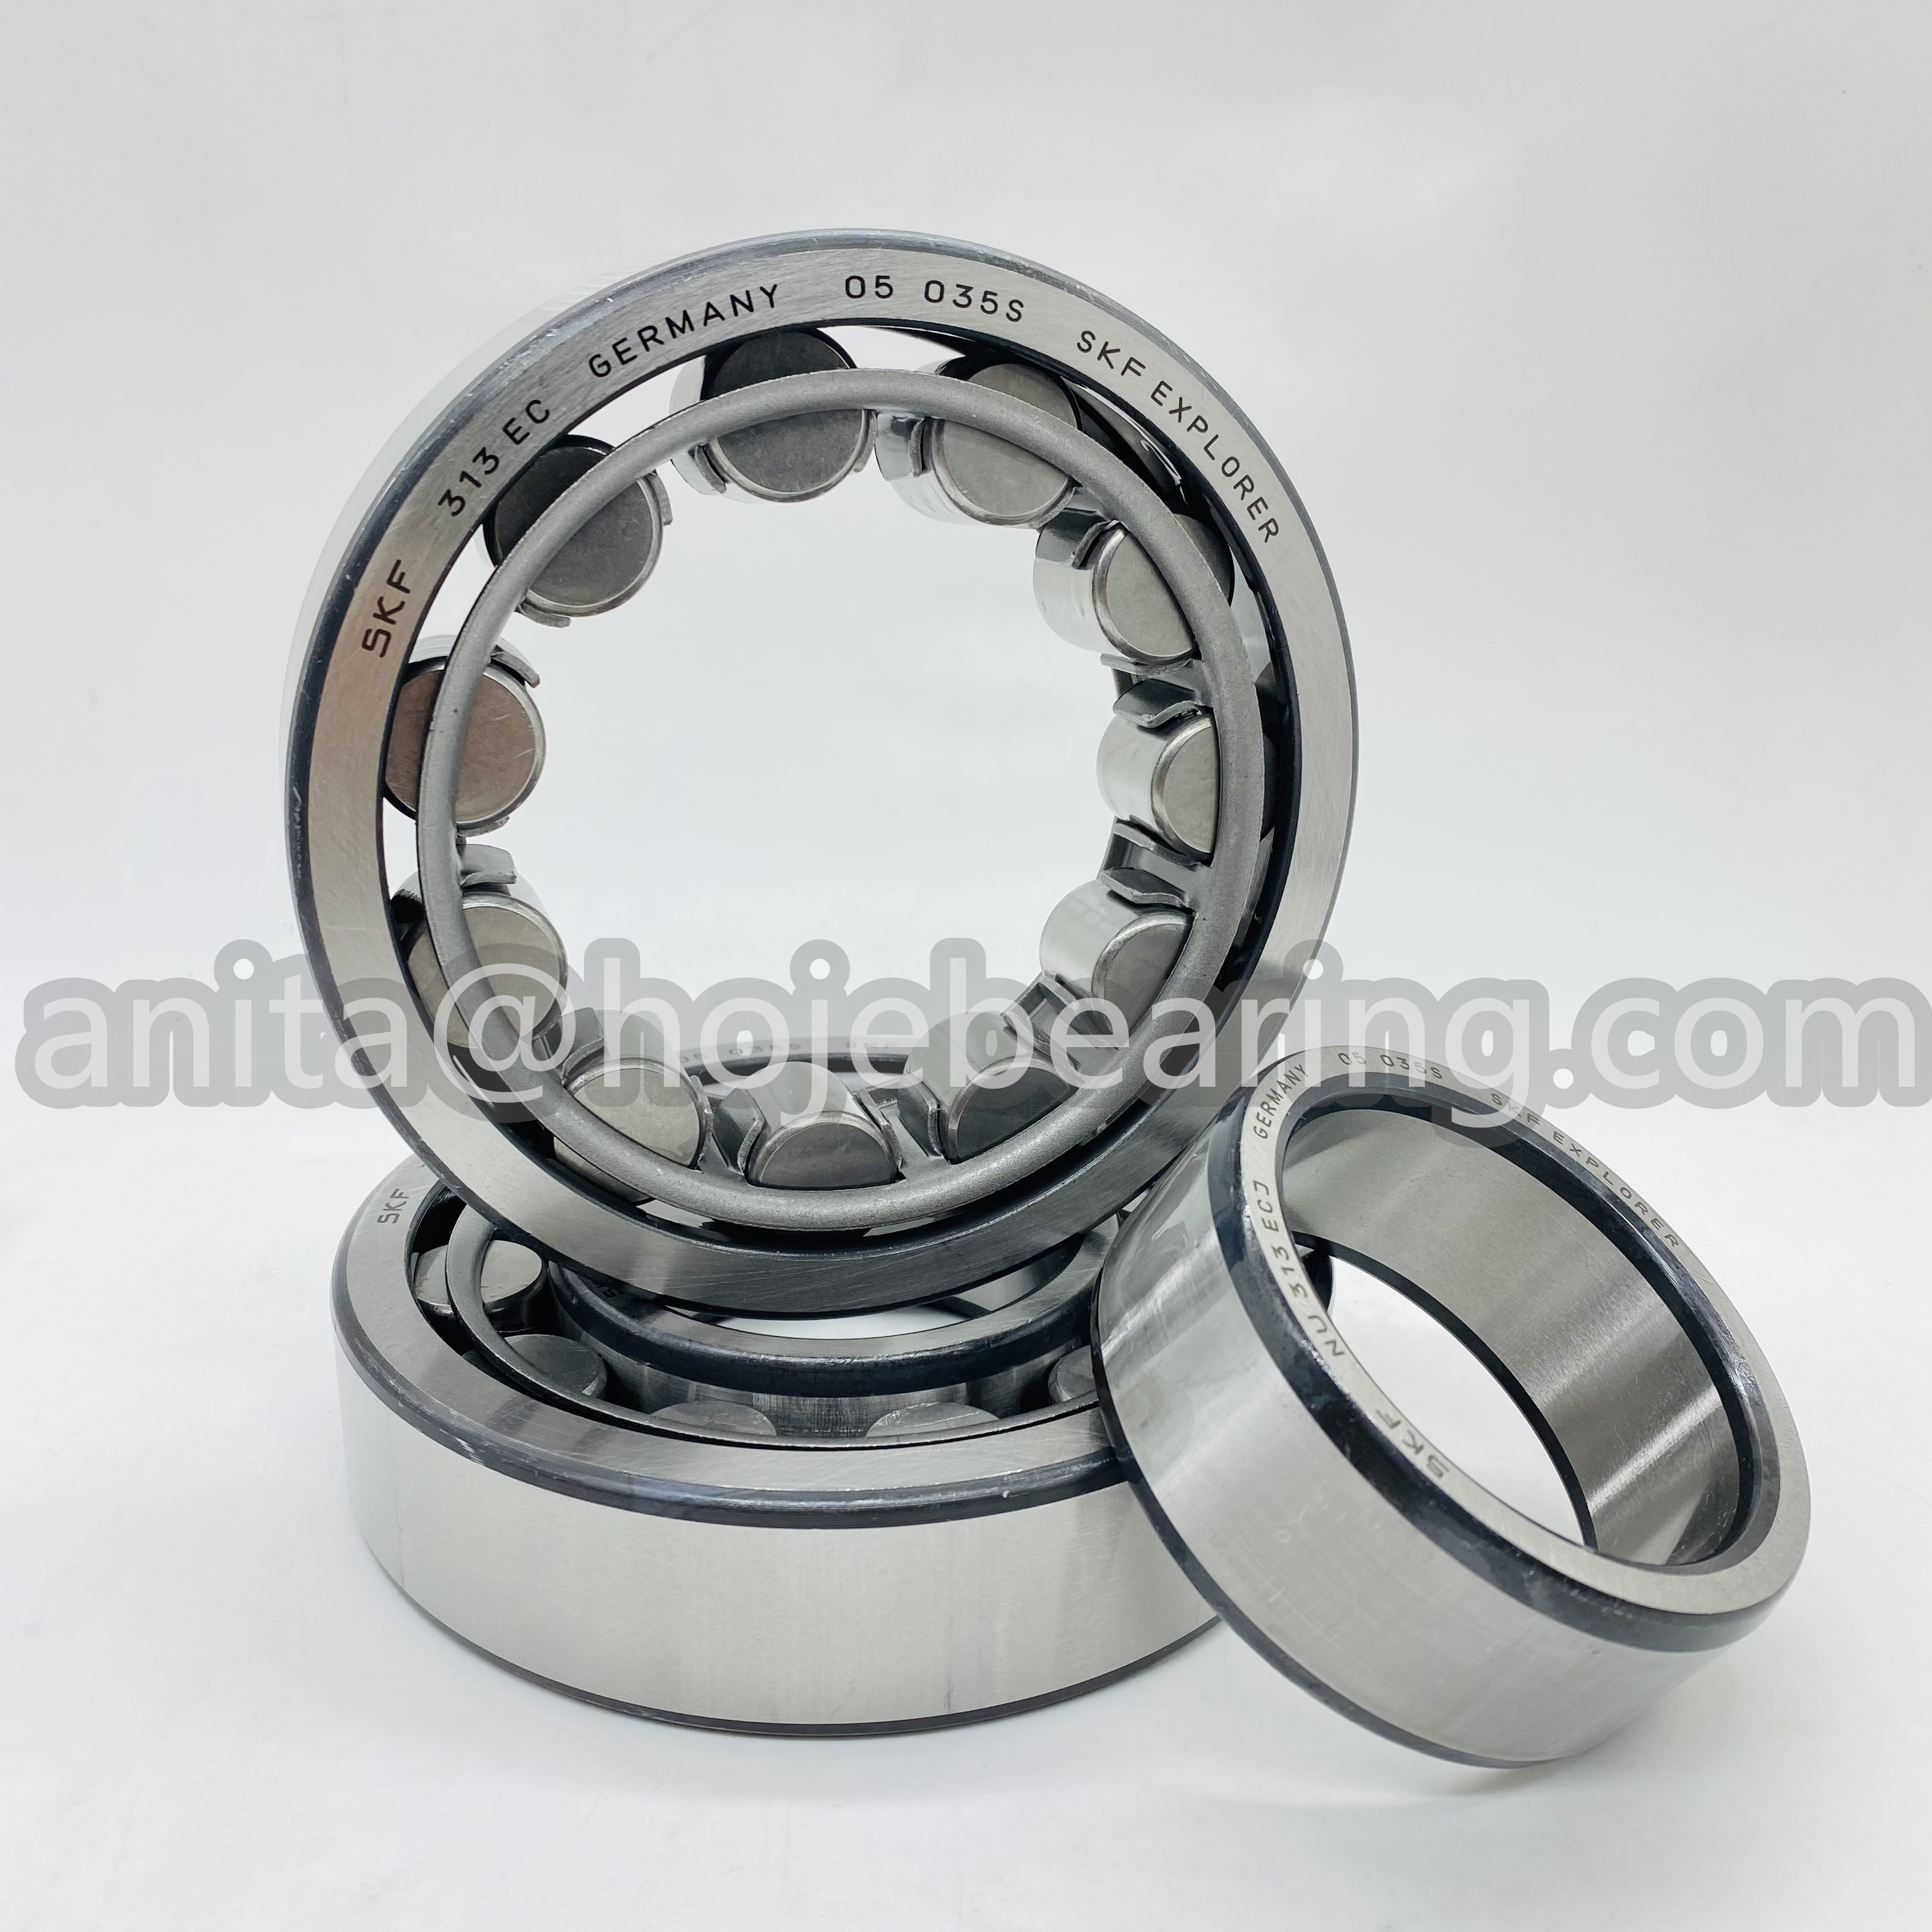 SKF NU 313 EC （Type EC Cylindrical Roller Bearing）, single row, rolling element centred